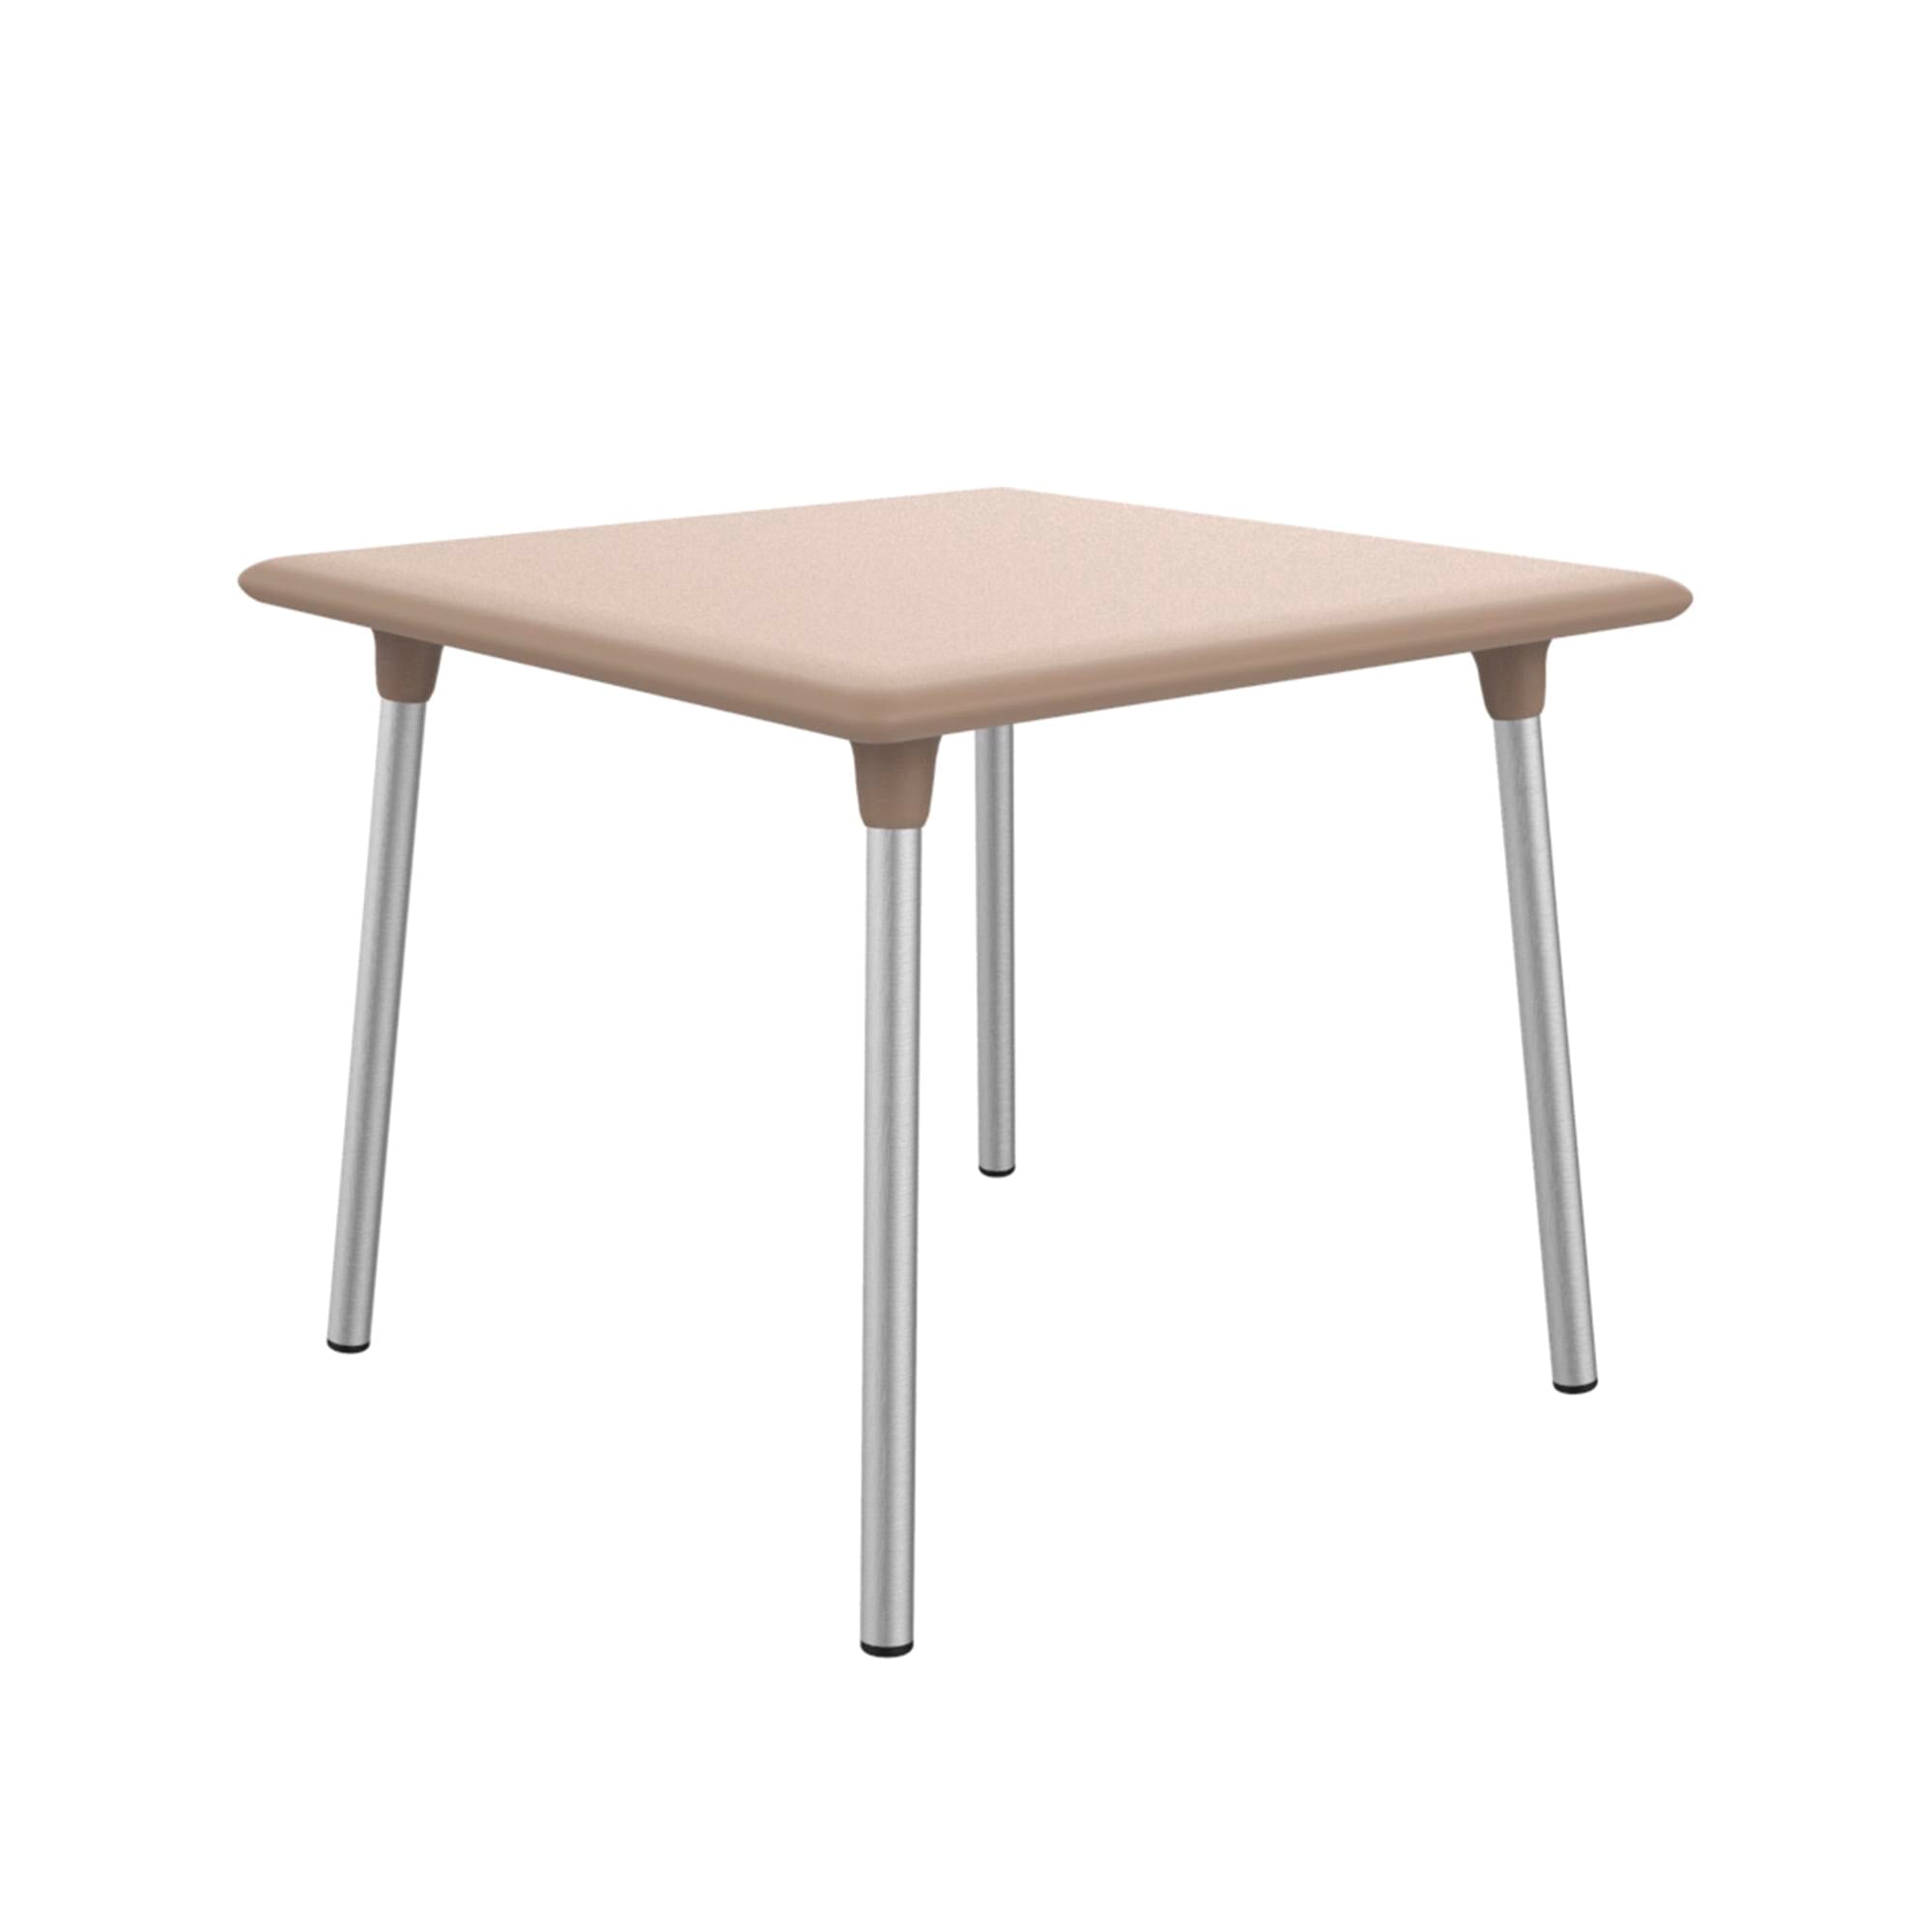 Resol new flash square table indoors, outdoor 90x90 sand